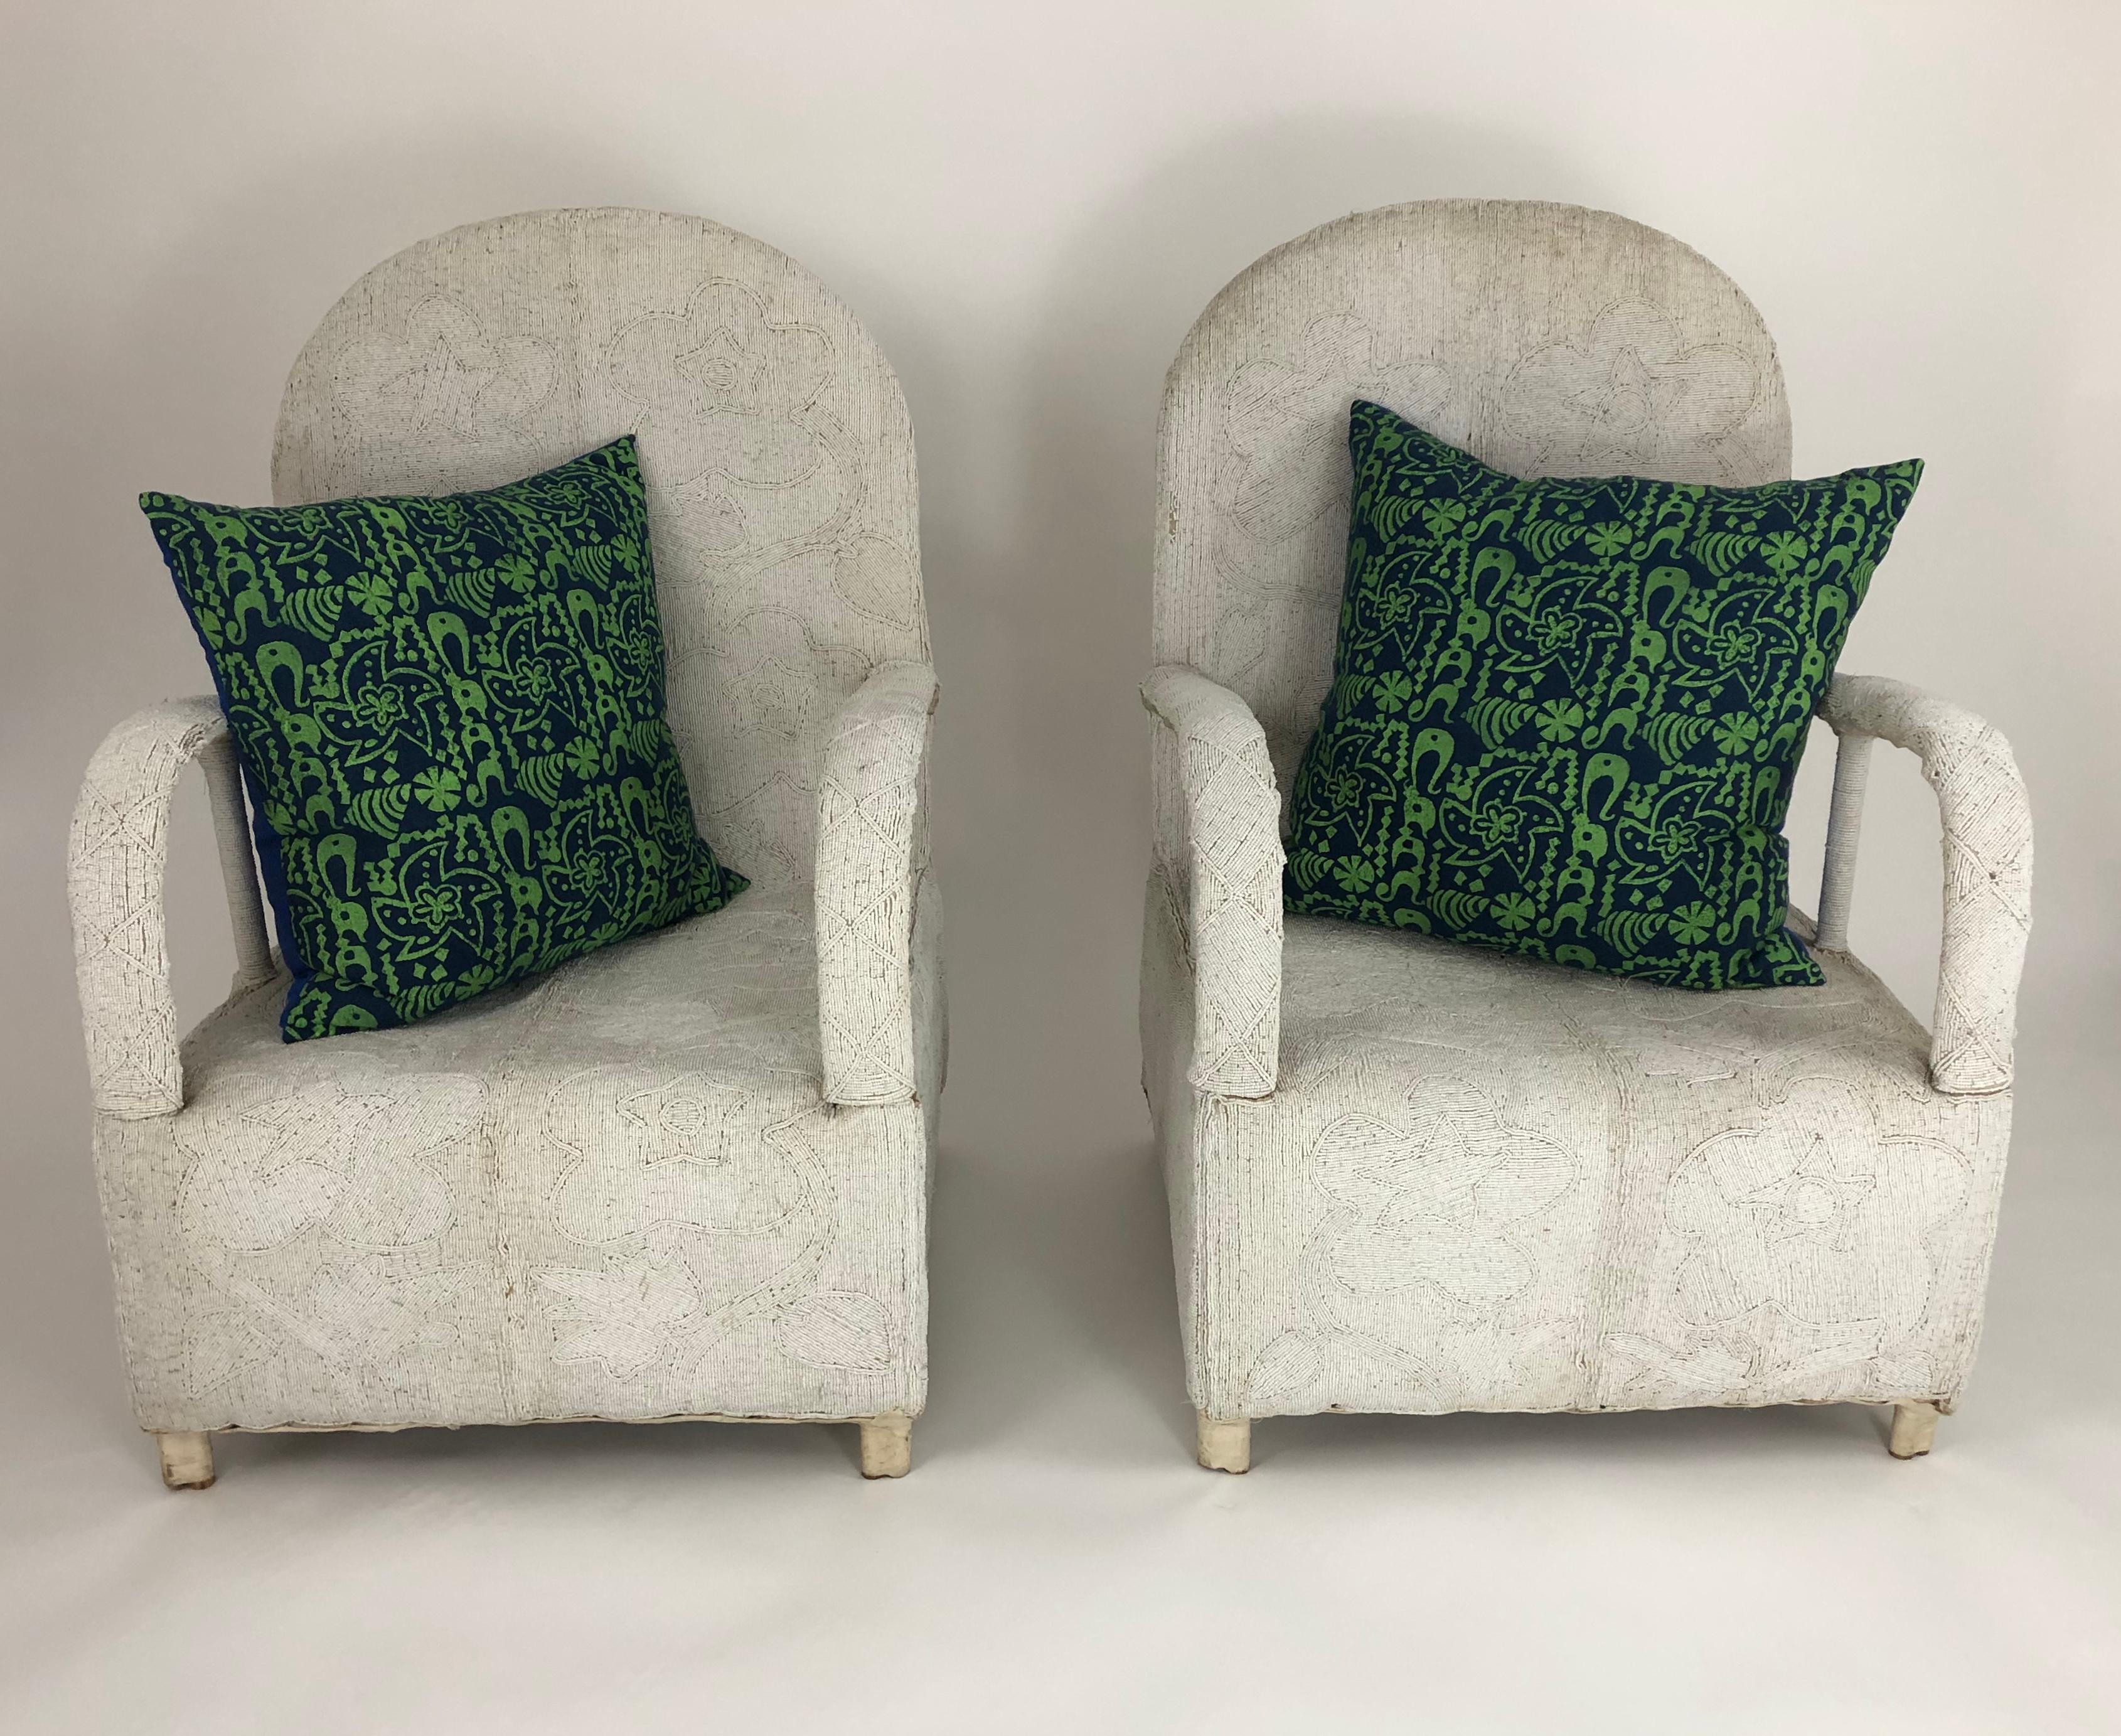 A pair of beautifully handmade African beaded lounge chairs by the Yoruba People, Nigeria. Originally reserved for Yoruba Royalty, these sculptural and comfortable chairs are decorated overall with small white beads. Completely handmade, these